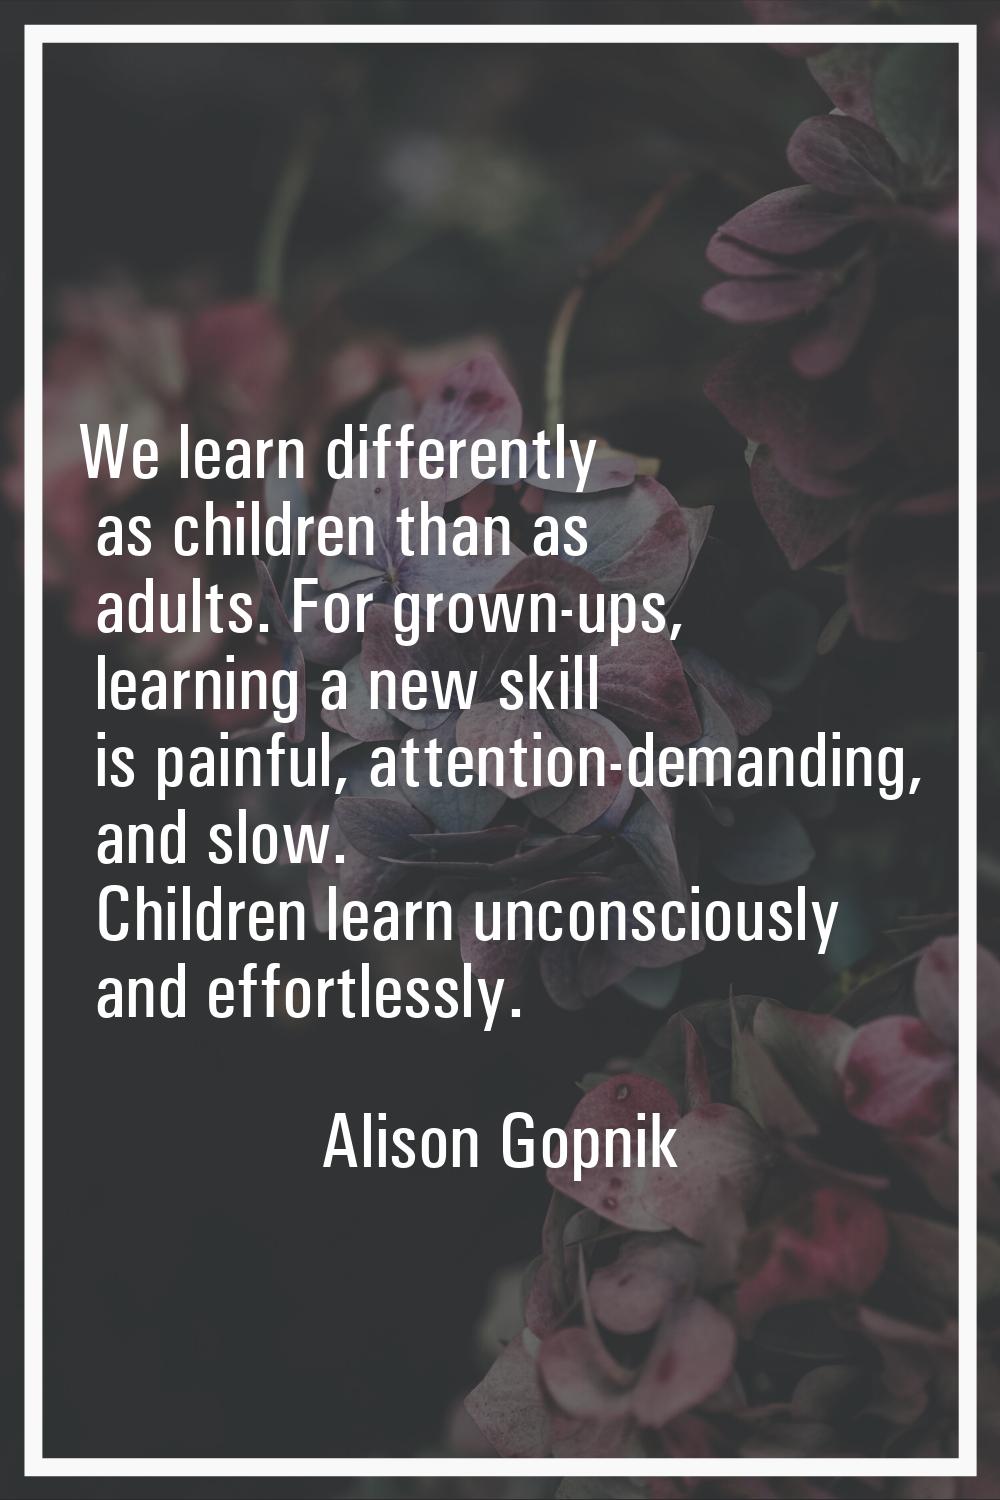 We learn differently as children than as adults. For grown-ups, learning a new skill is painful, at